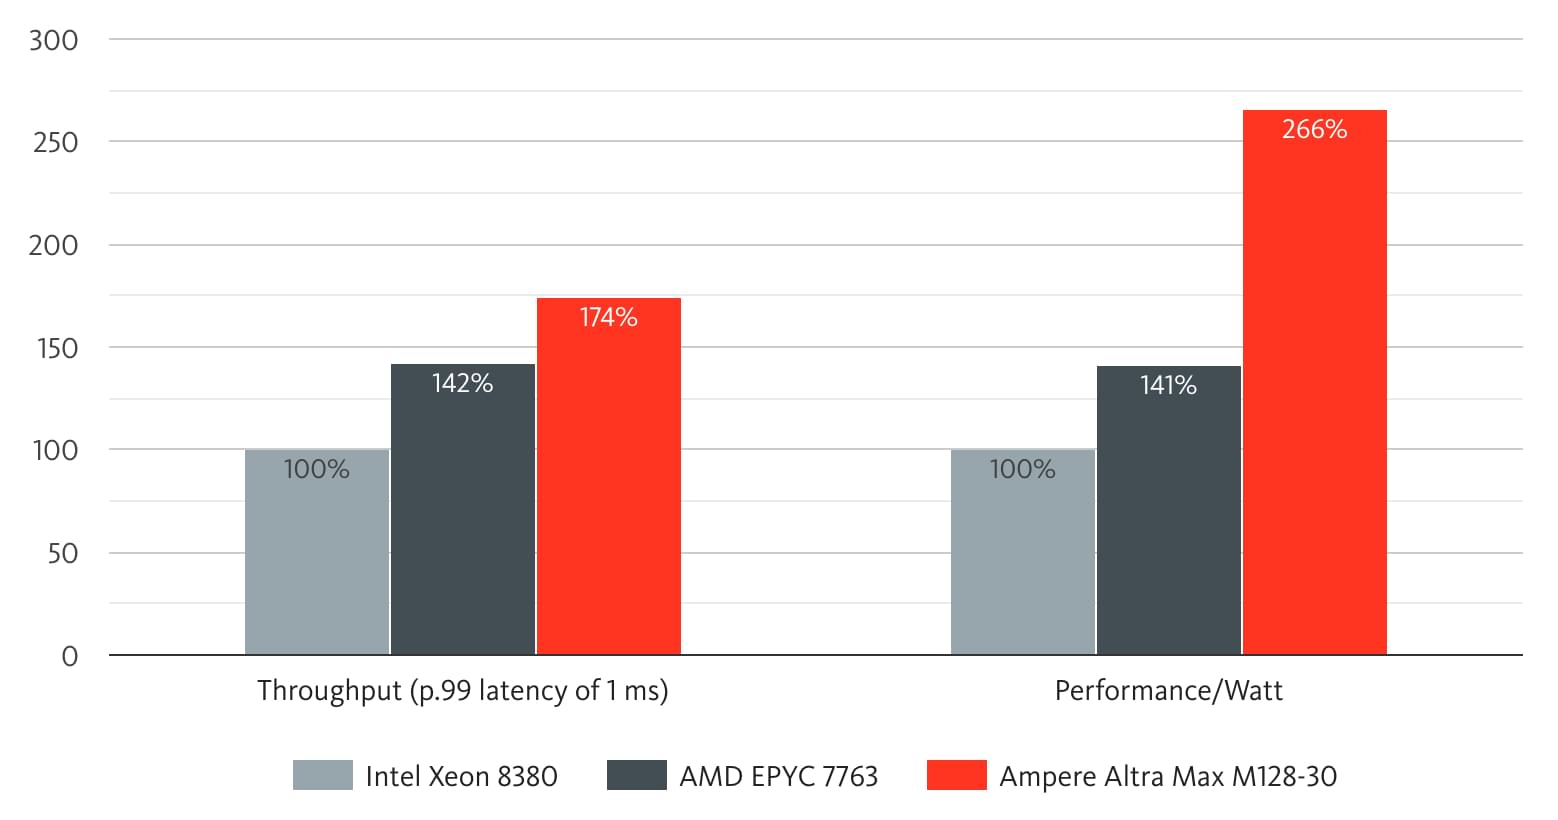 Memcached Performance and Energy Efficiency